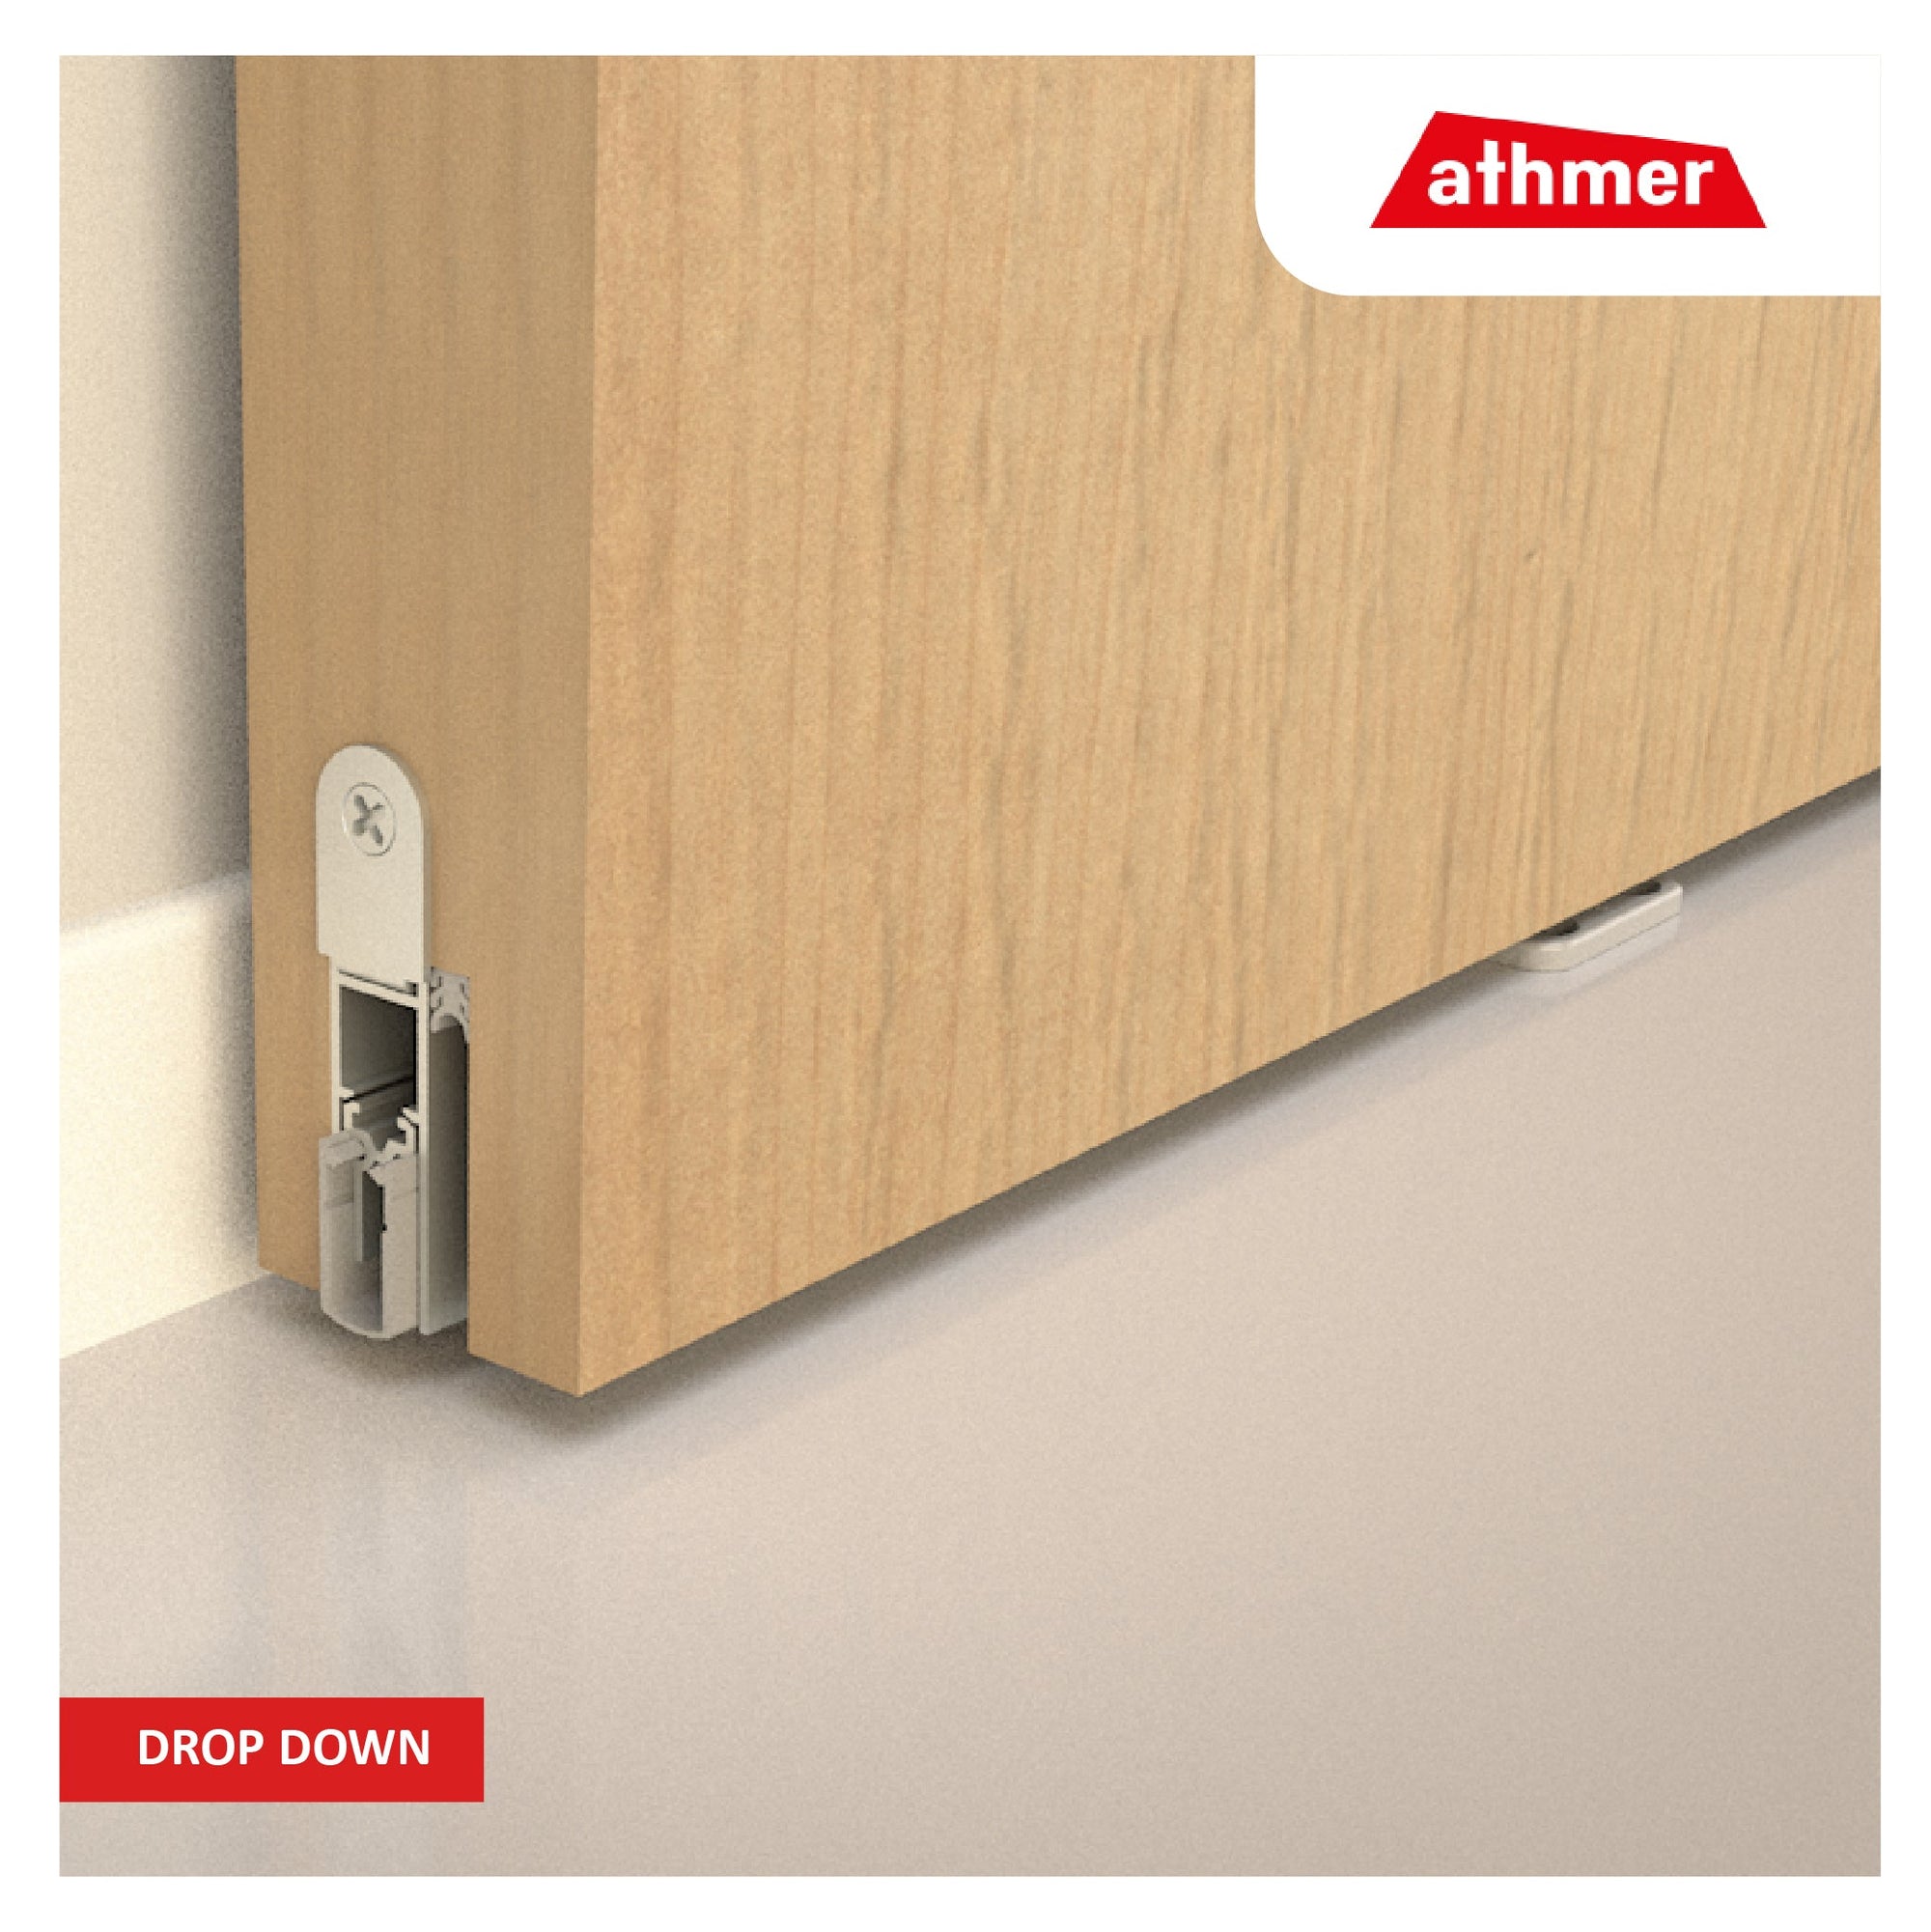 High-Quality Athmer Drop Down Seals - Seal and Protect Your Doors. Shop Now at M. M. Noorbhoy & Co.